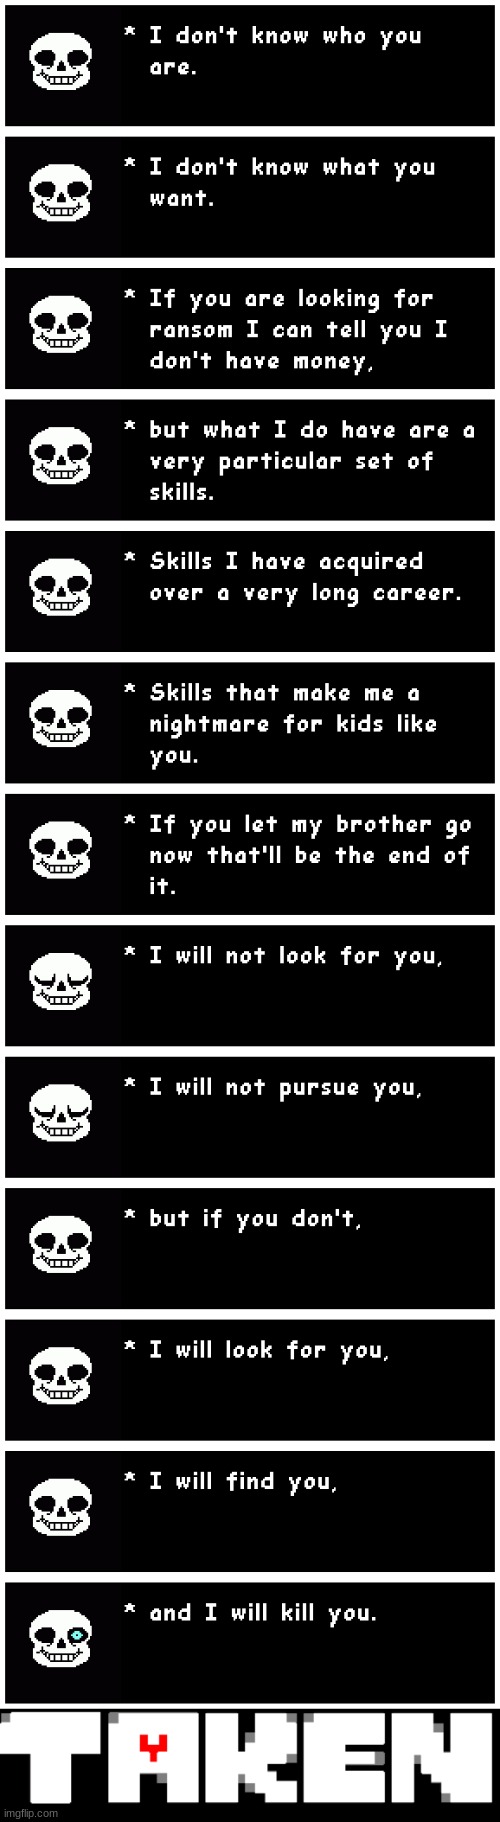 Taken Sans | image tagged in funny memes,funny,undertale,crossover,memes | made w/ Imgflip meme maker